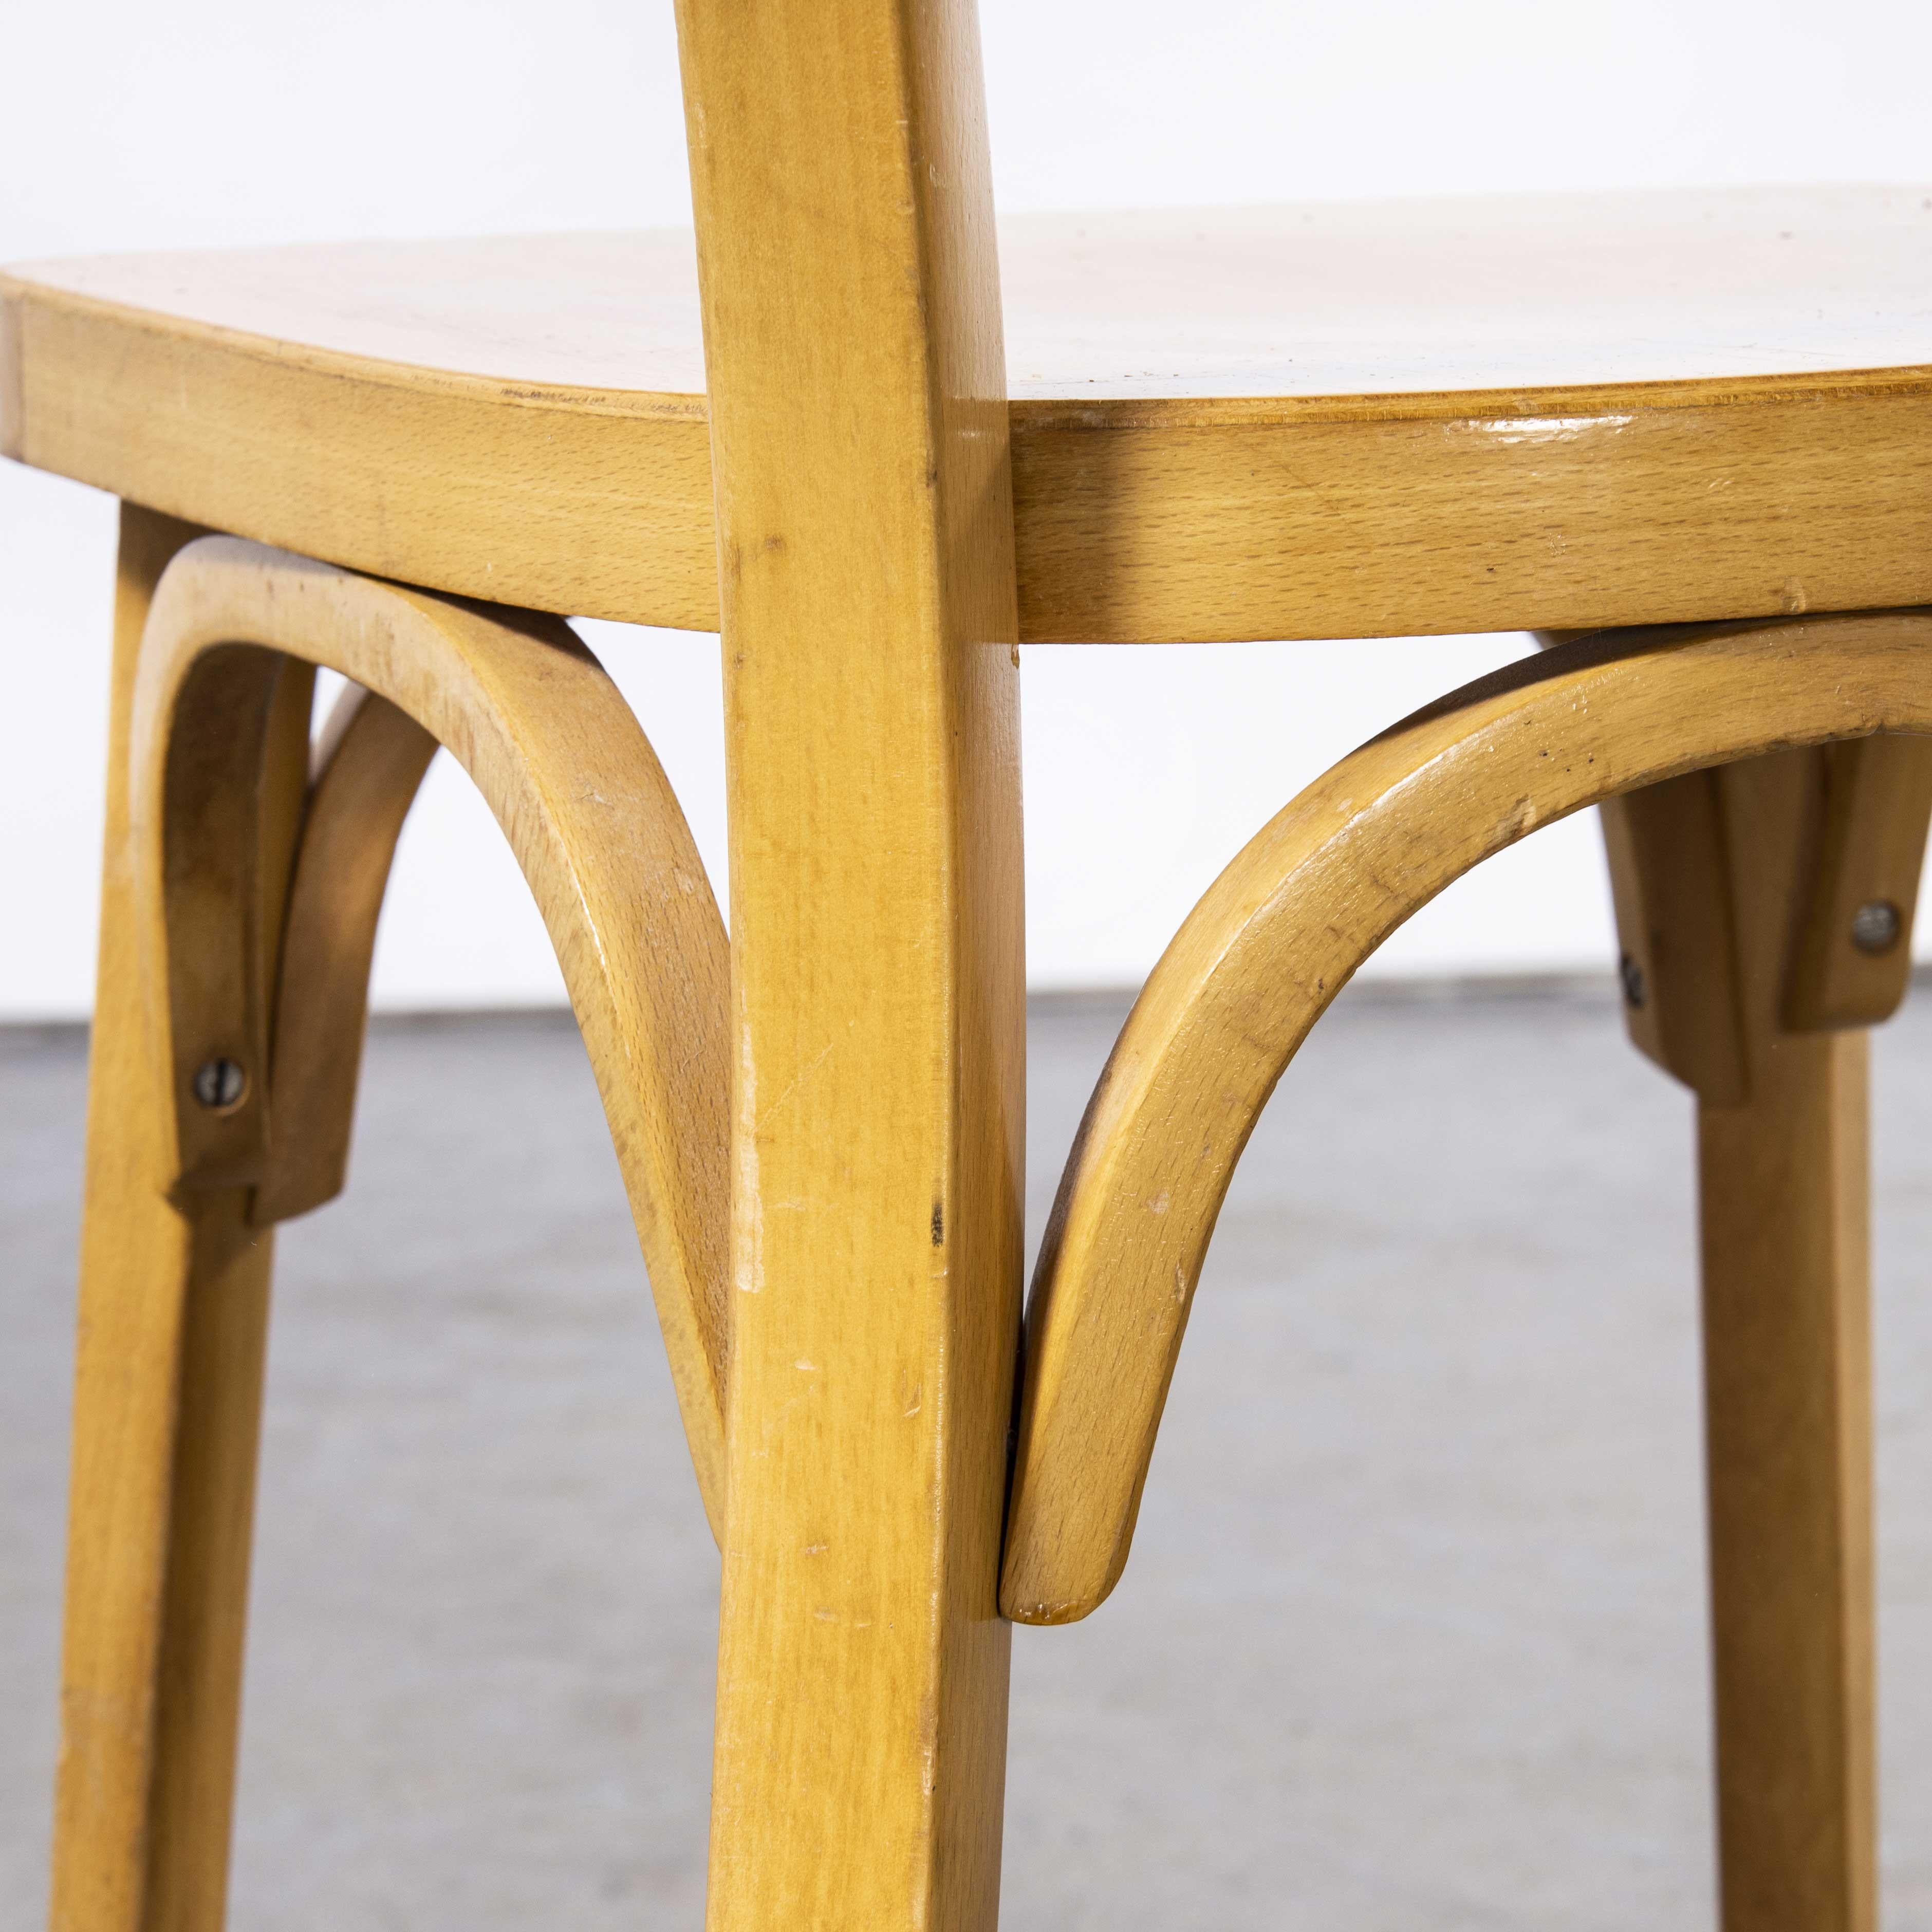 1950’s French Baumann blonde beech bentwood dining chairs – set of four (Model 1402)

1950’s French Baumann blonde beech bentwood dining chairs – set of four (Model 1402). Baumann is a slightly off the radar French producer just starting to gain